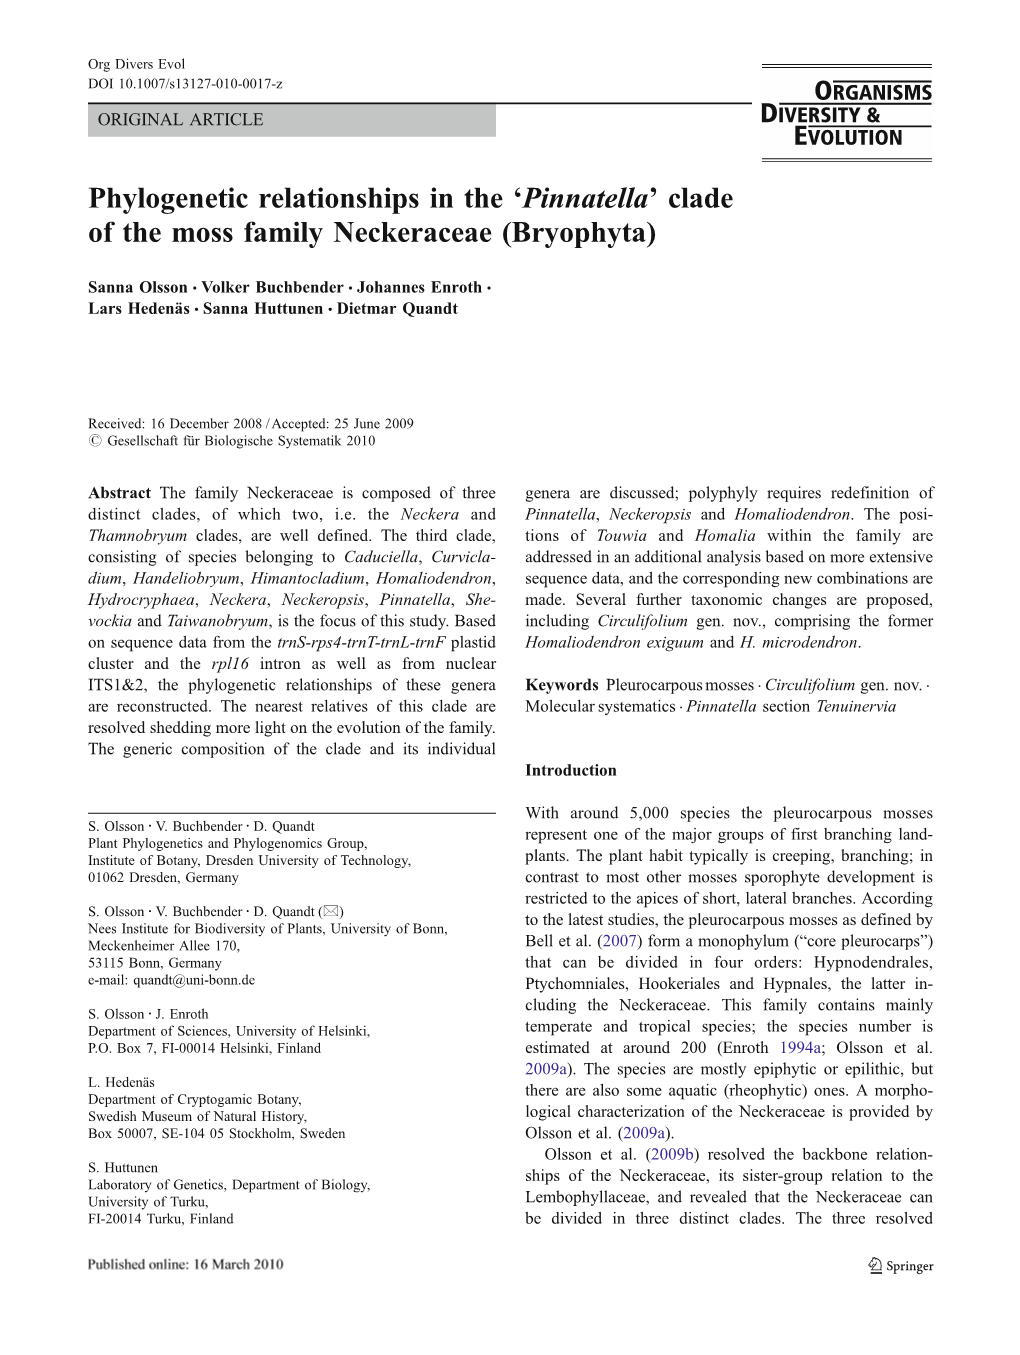 Phylogenetic Relationships in the 'Pinnatella' Clade of the Moss Family Neckeraceae (Bryophyta)